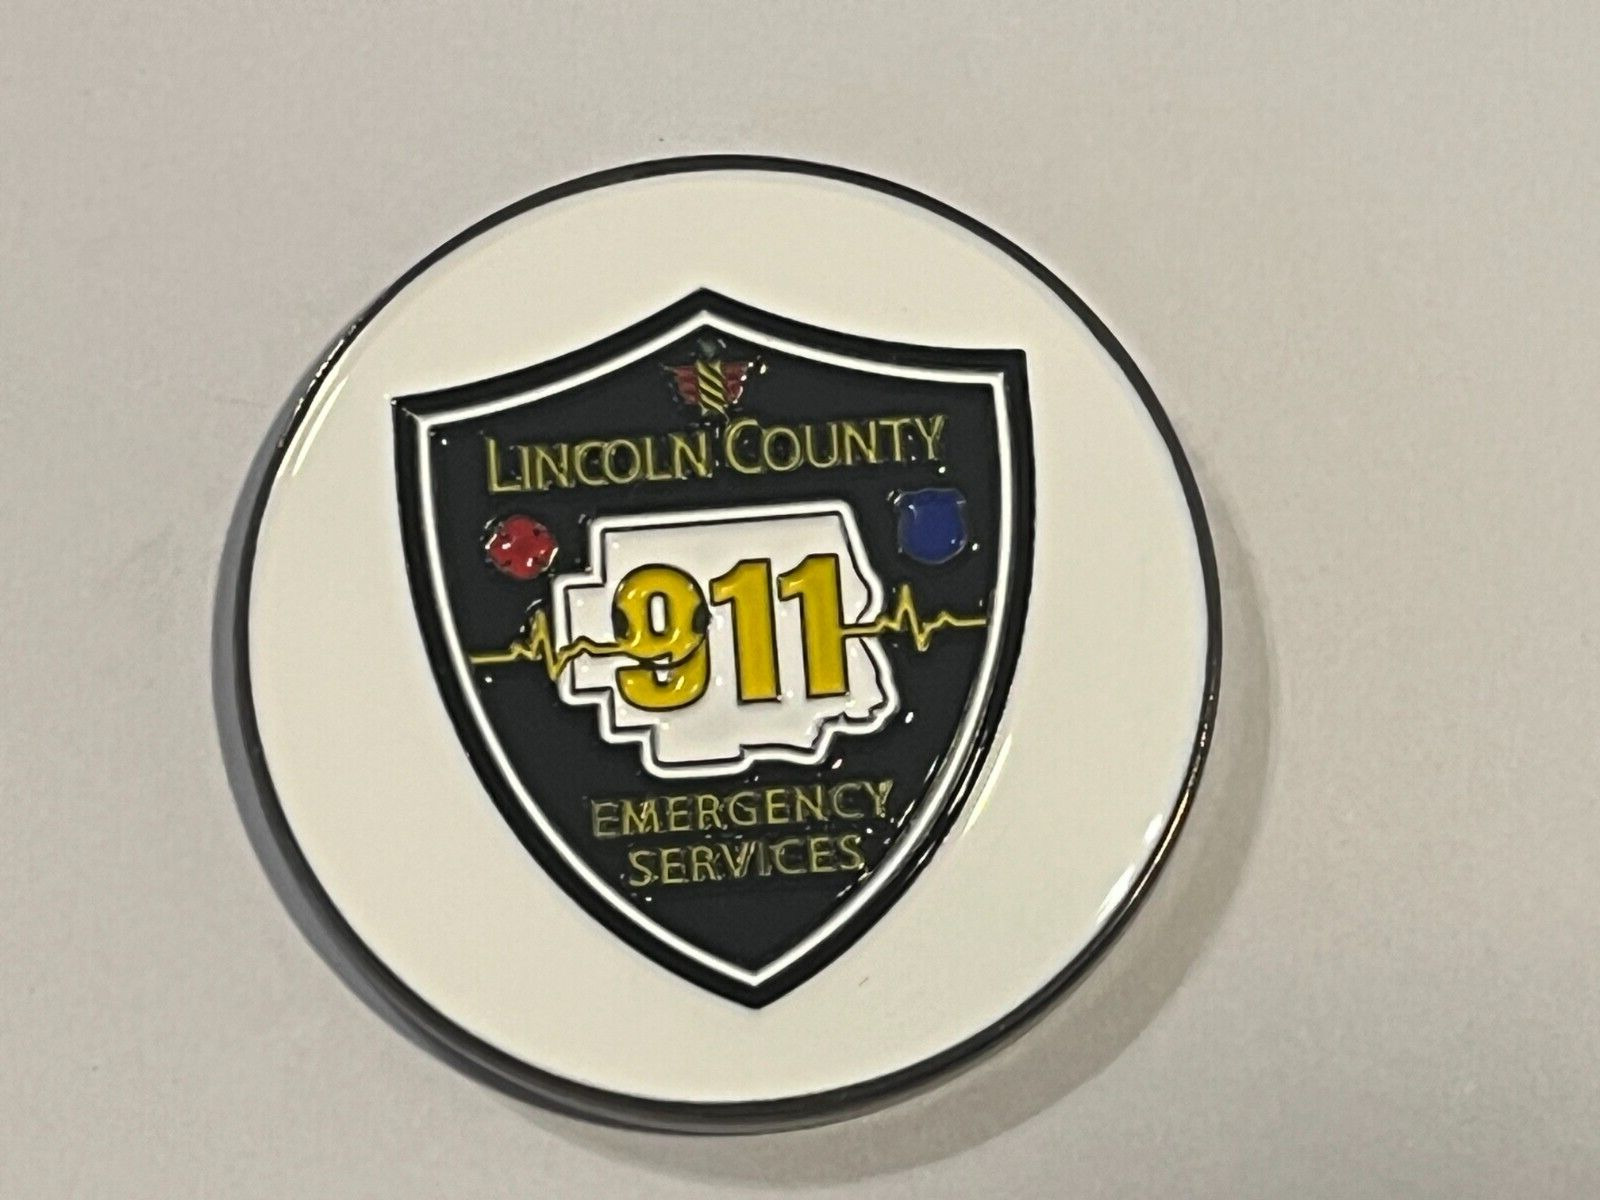 Lincoln County (MO) 9-1-1 Emergency Services Challenge Coin (C25)